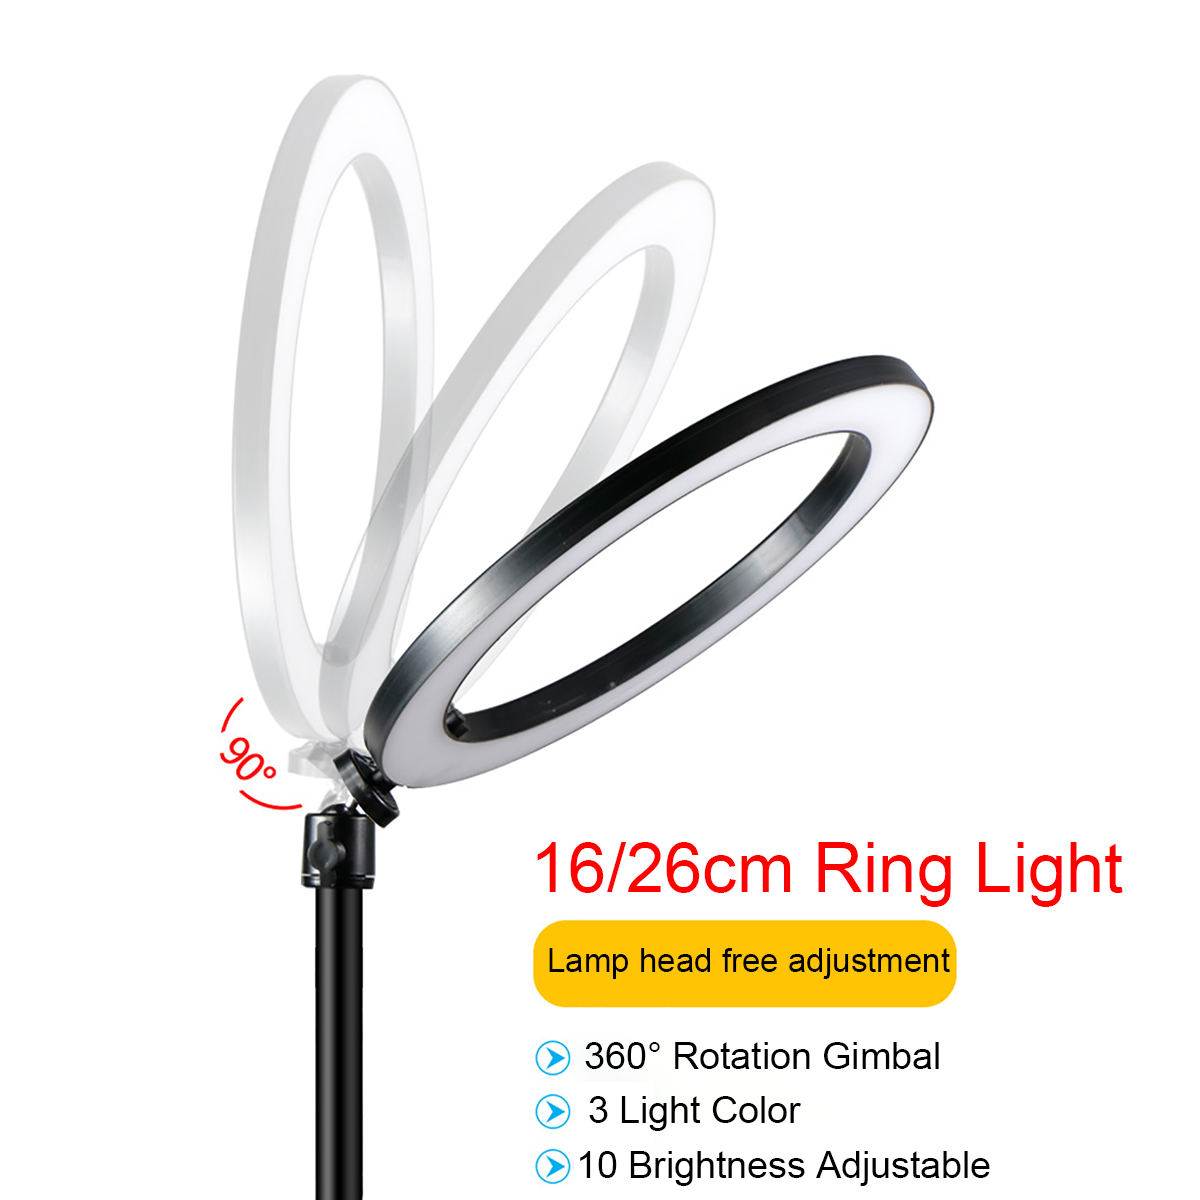 1625cm-Dimmable-LED-Video-Ring-Light-Tripod-Stand-with-PhoneMic-Holder-bluetooth-Selfie-Shutter-for--1610611-9